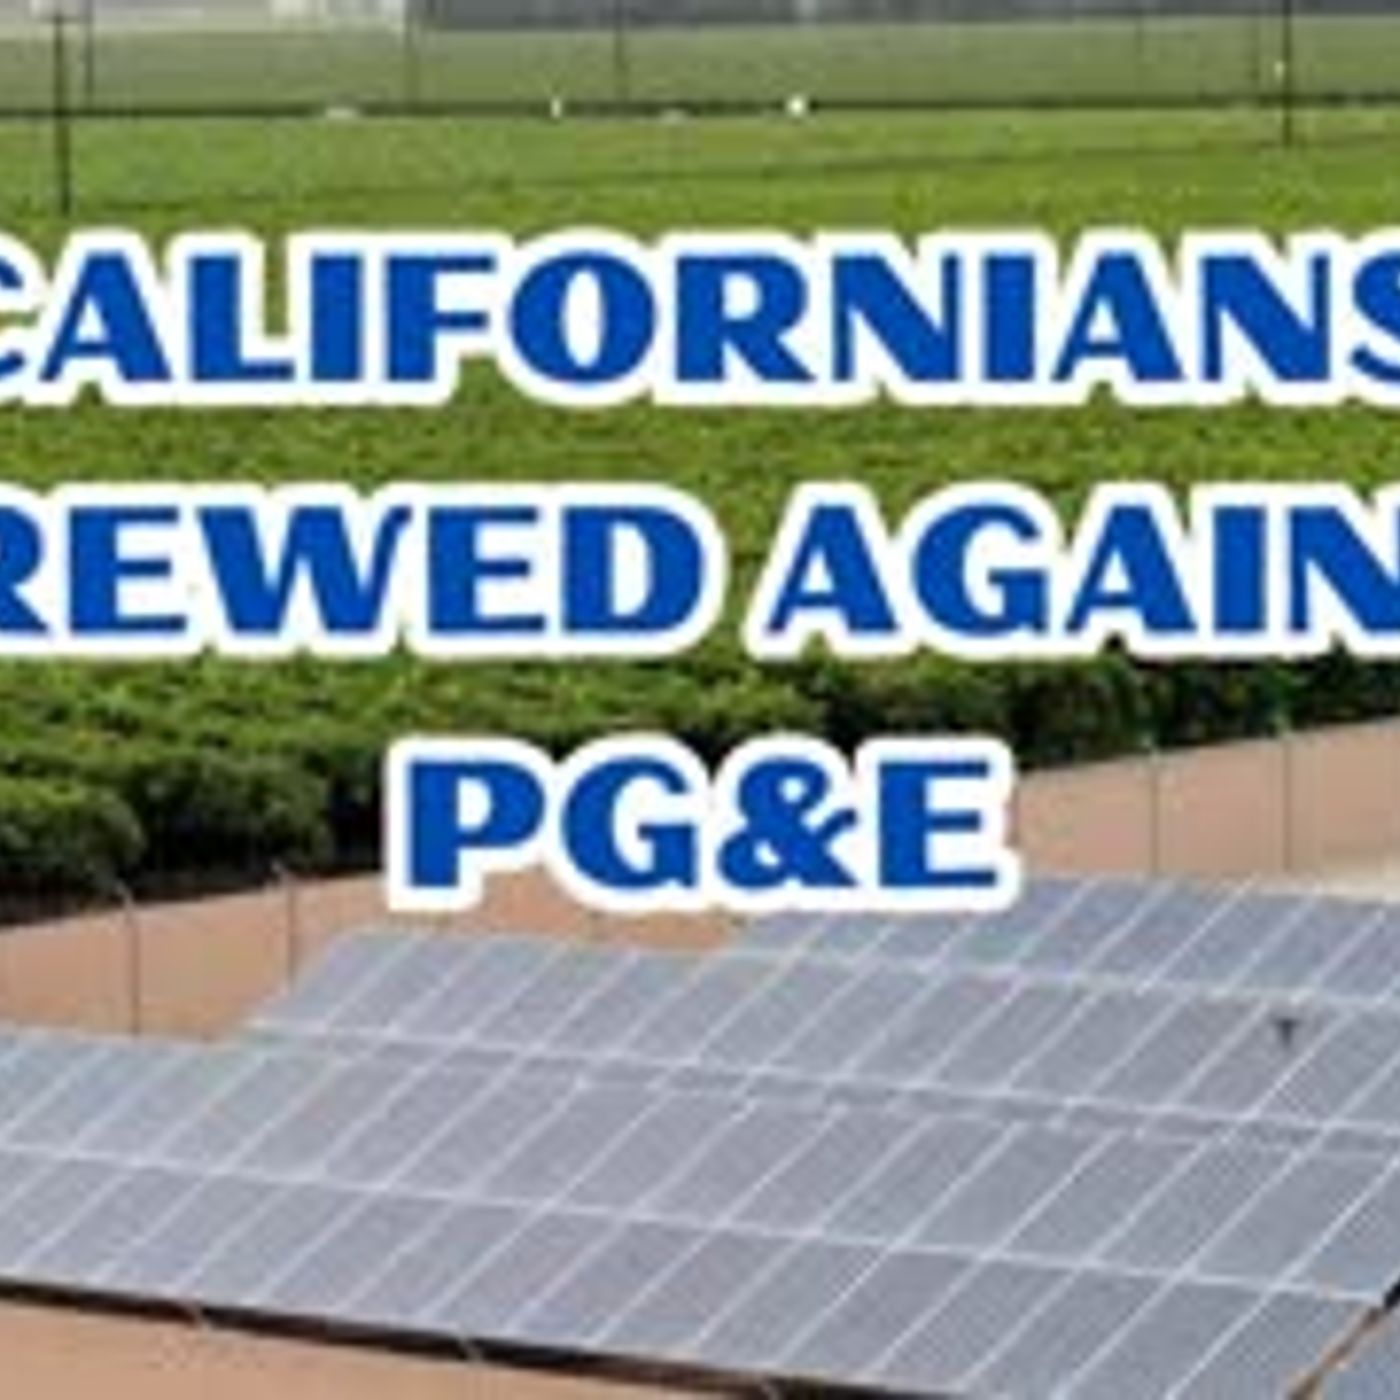 PG&E gets another win from the CPUC and Californians lose